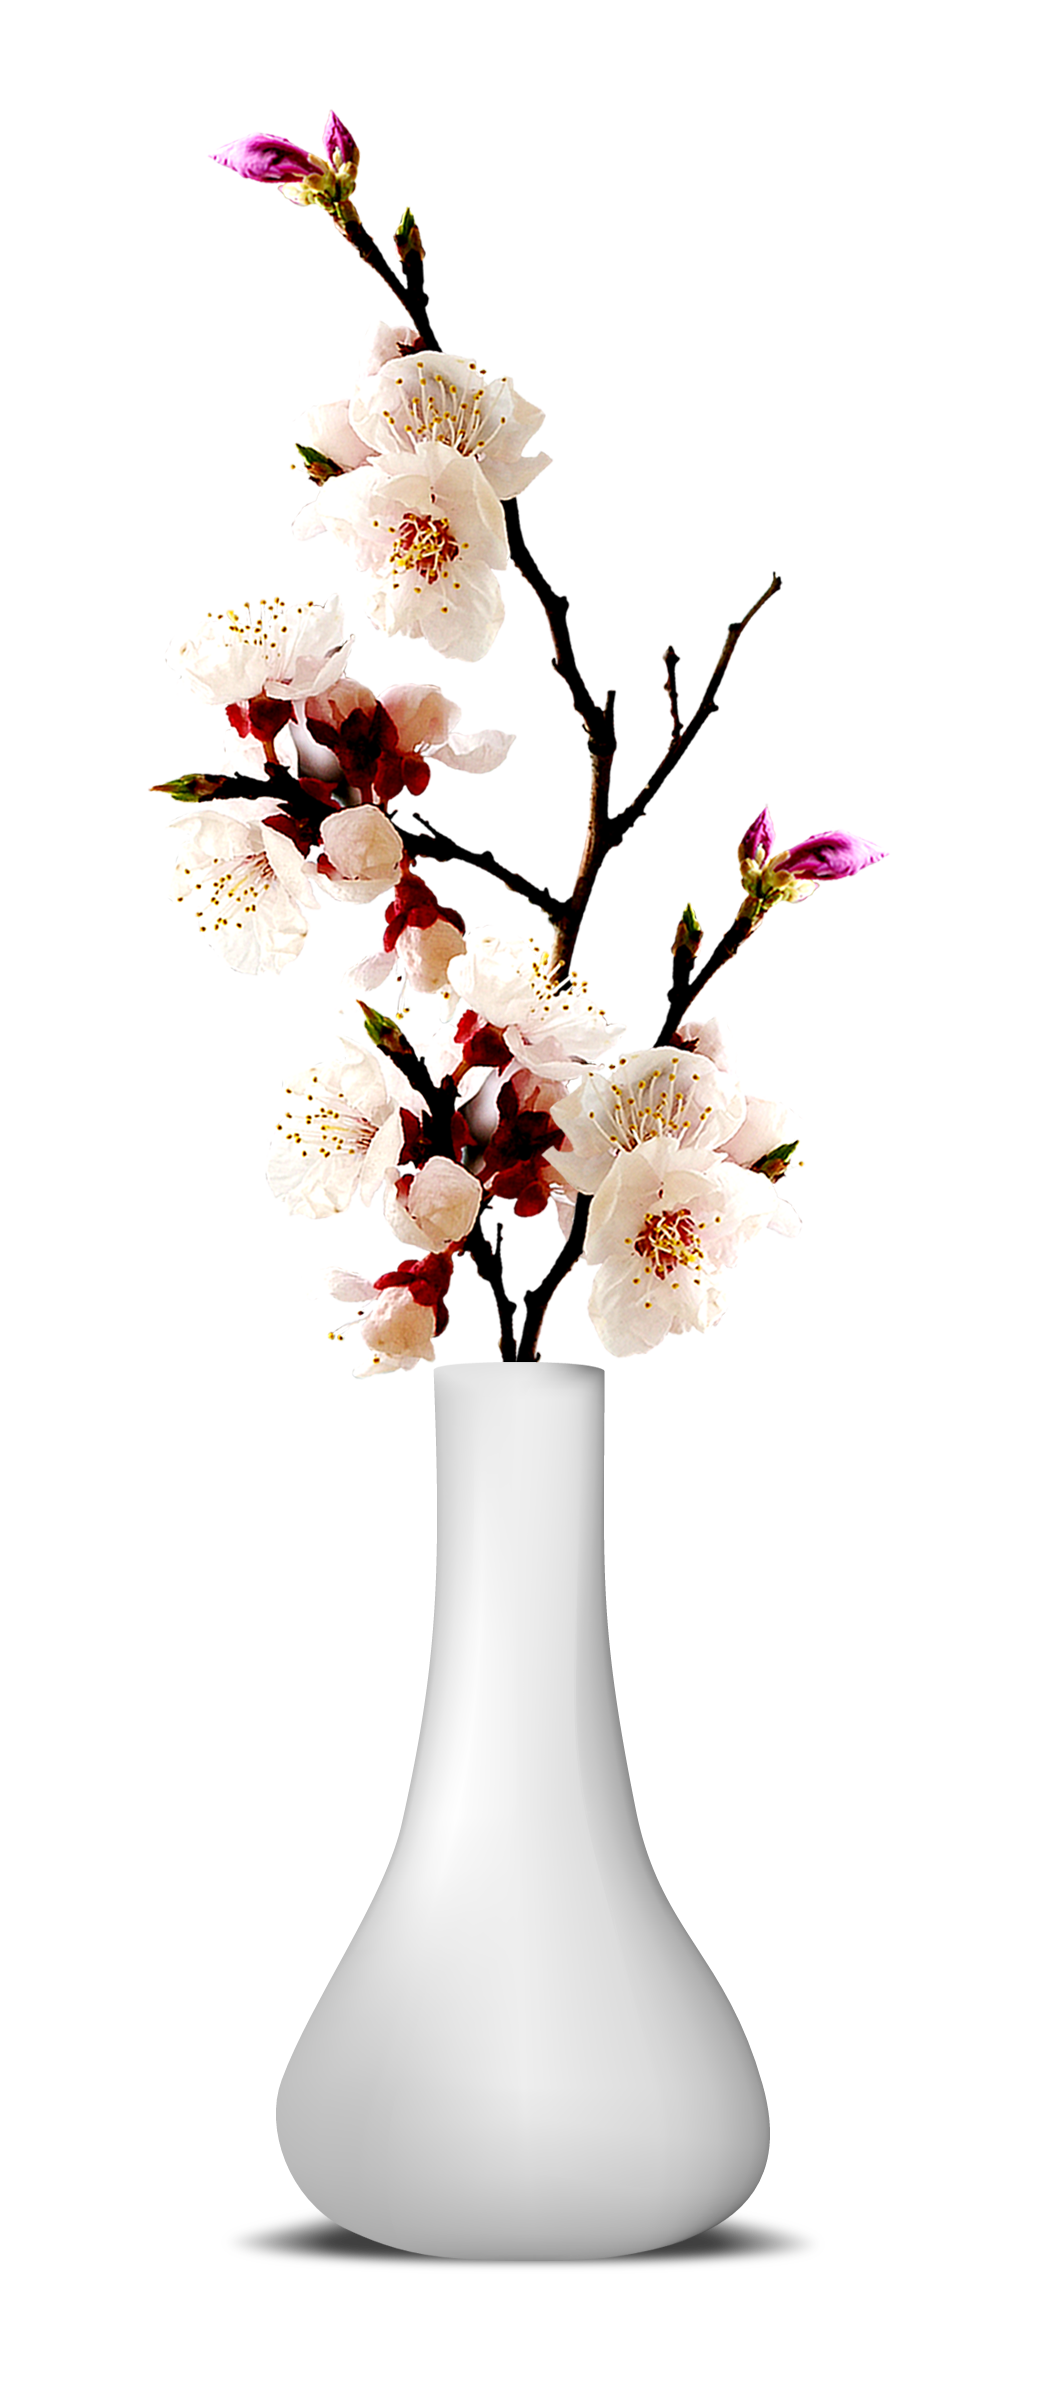 85+ Background Of Flower Vase Pictures - MyWeb